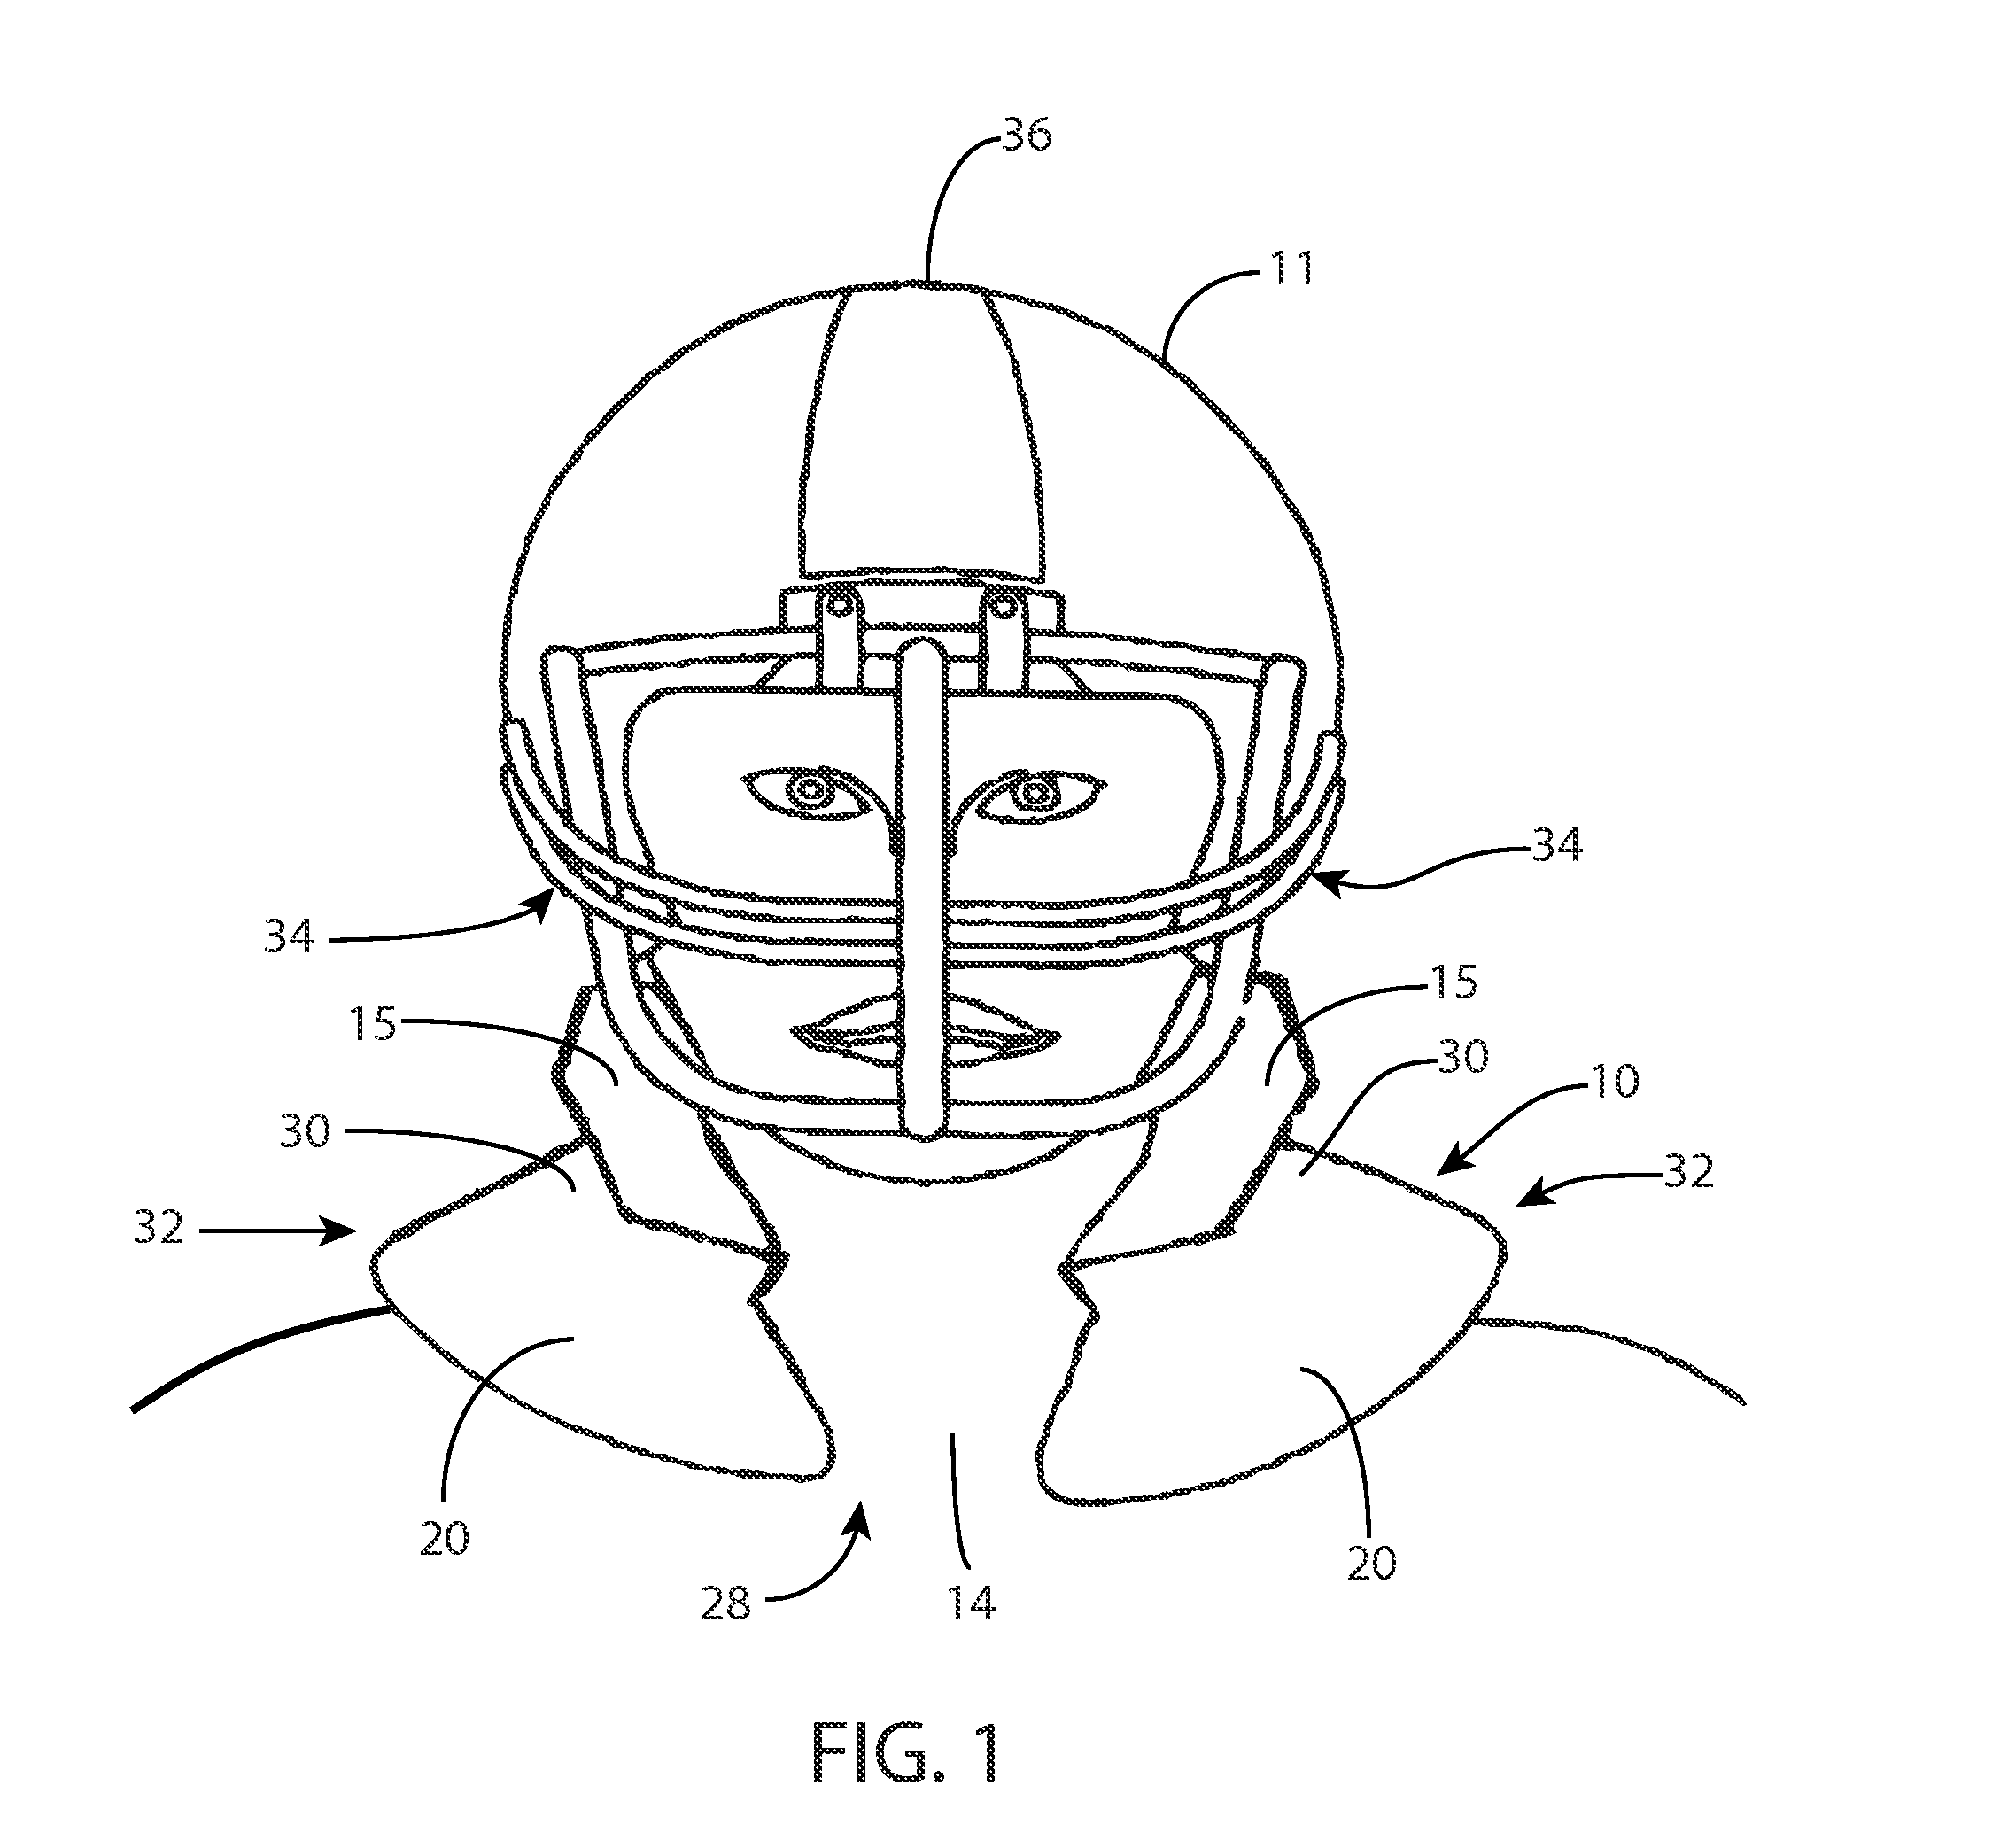 Cervical spine protection device